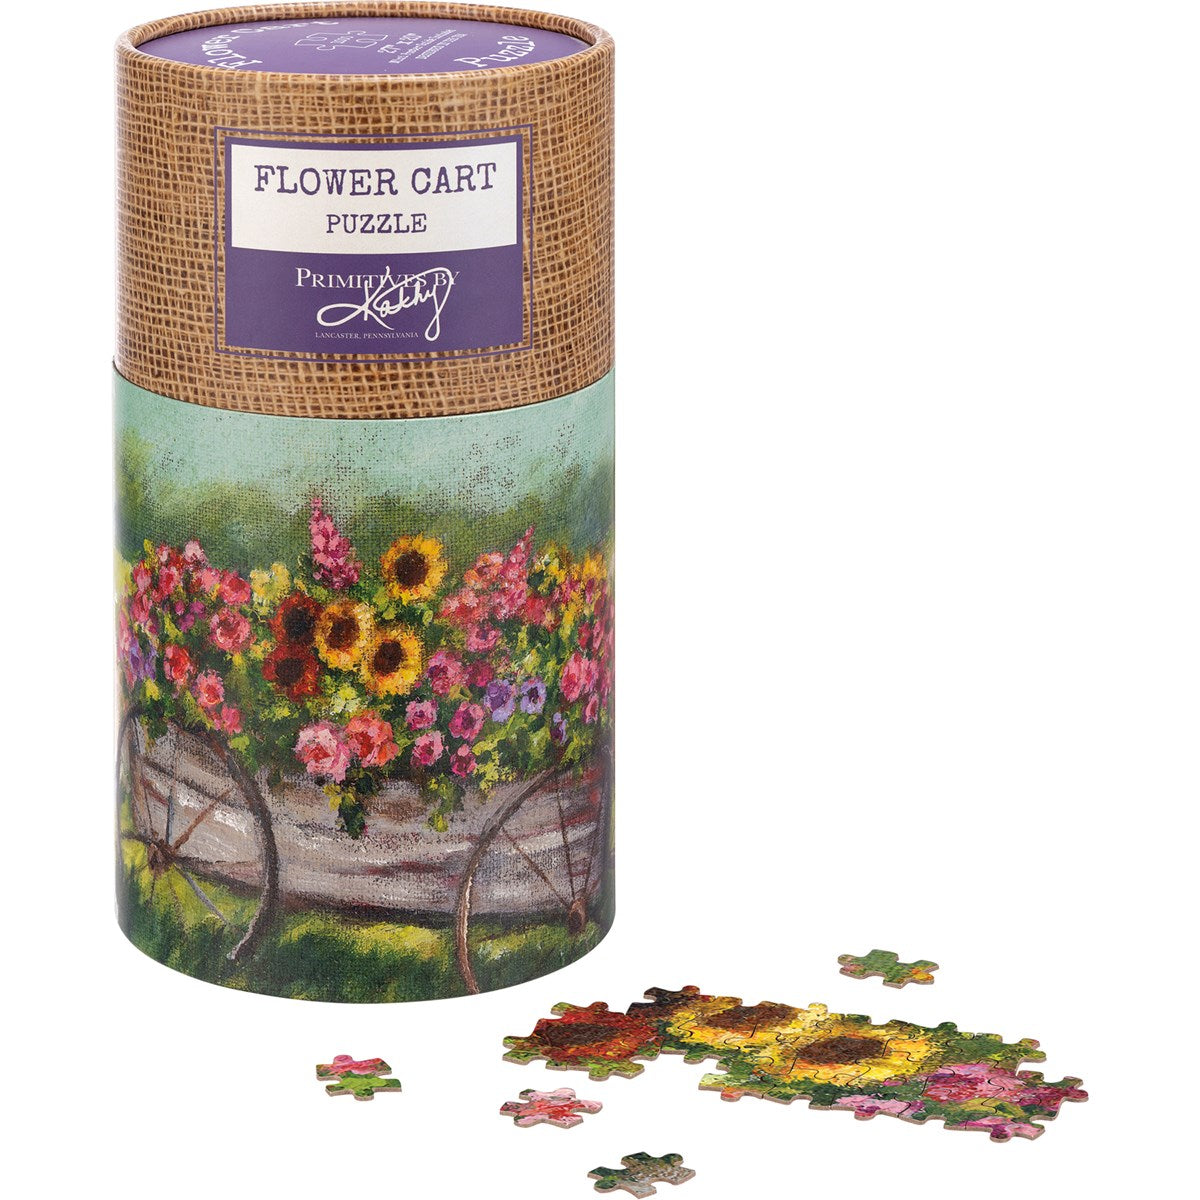 Games - Flower Cart Puzzle Tube